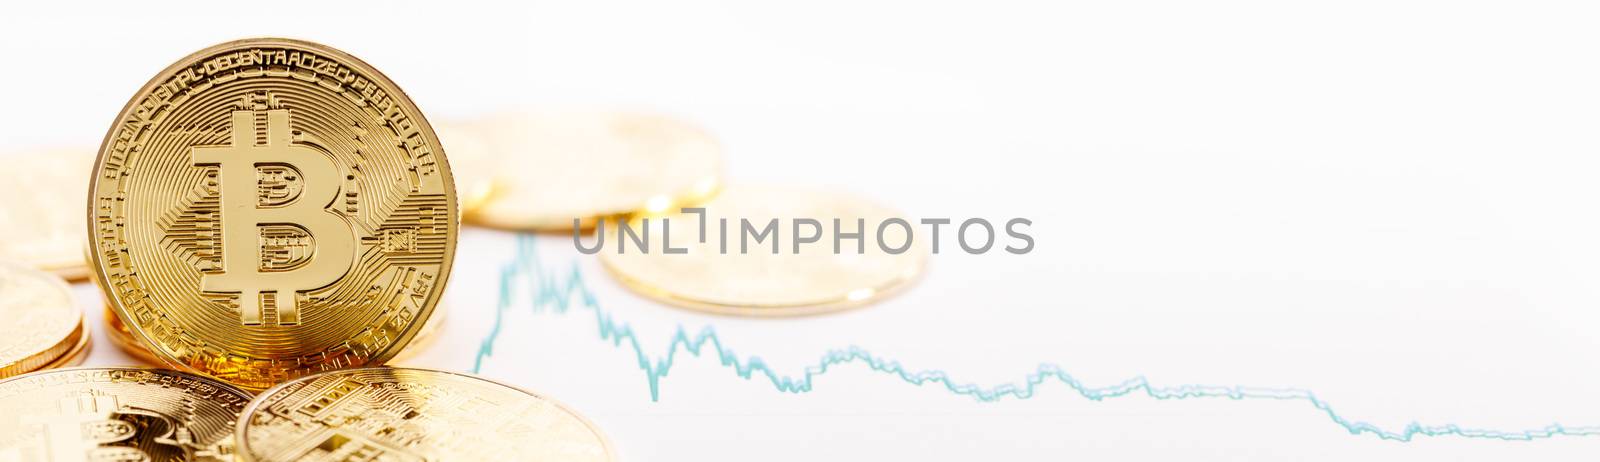 Coins with bitcoin sign and graph by Yellowj